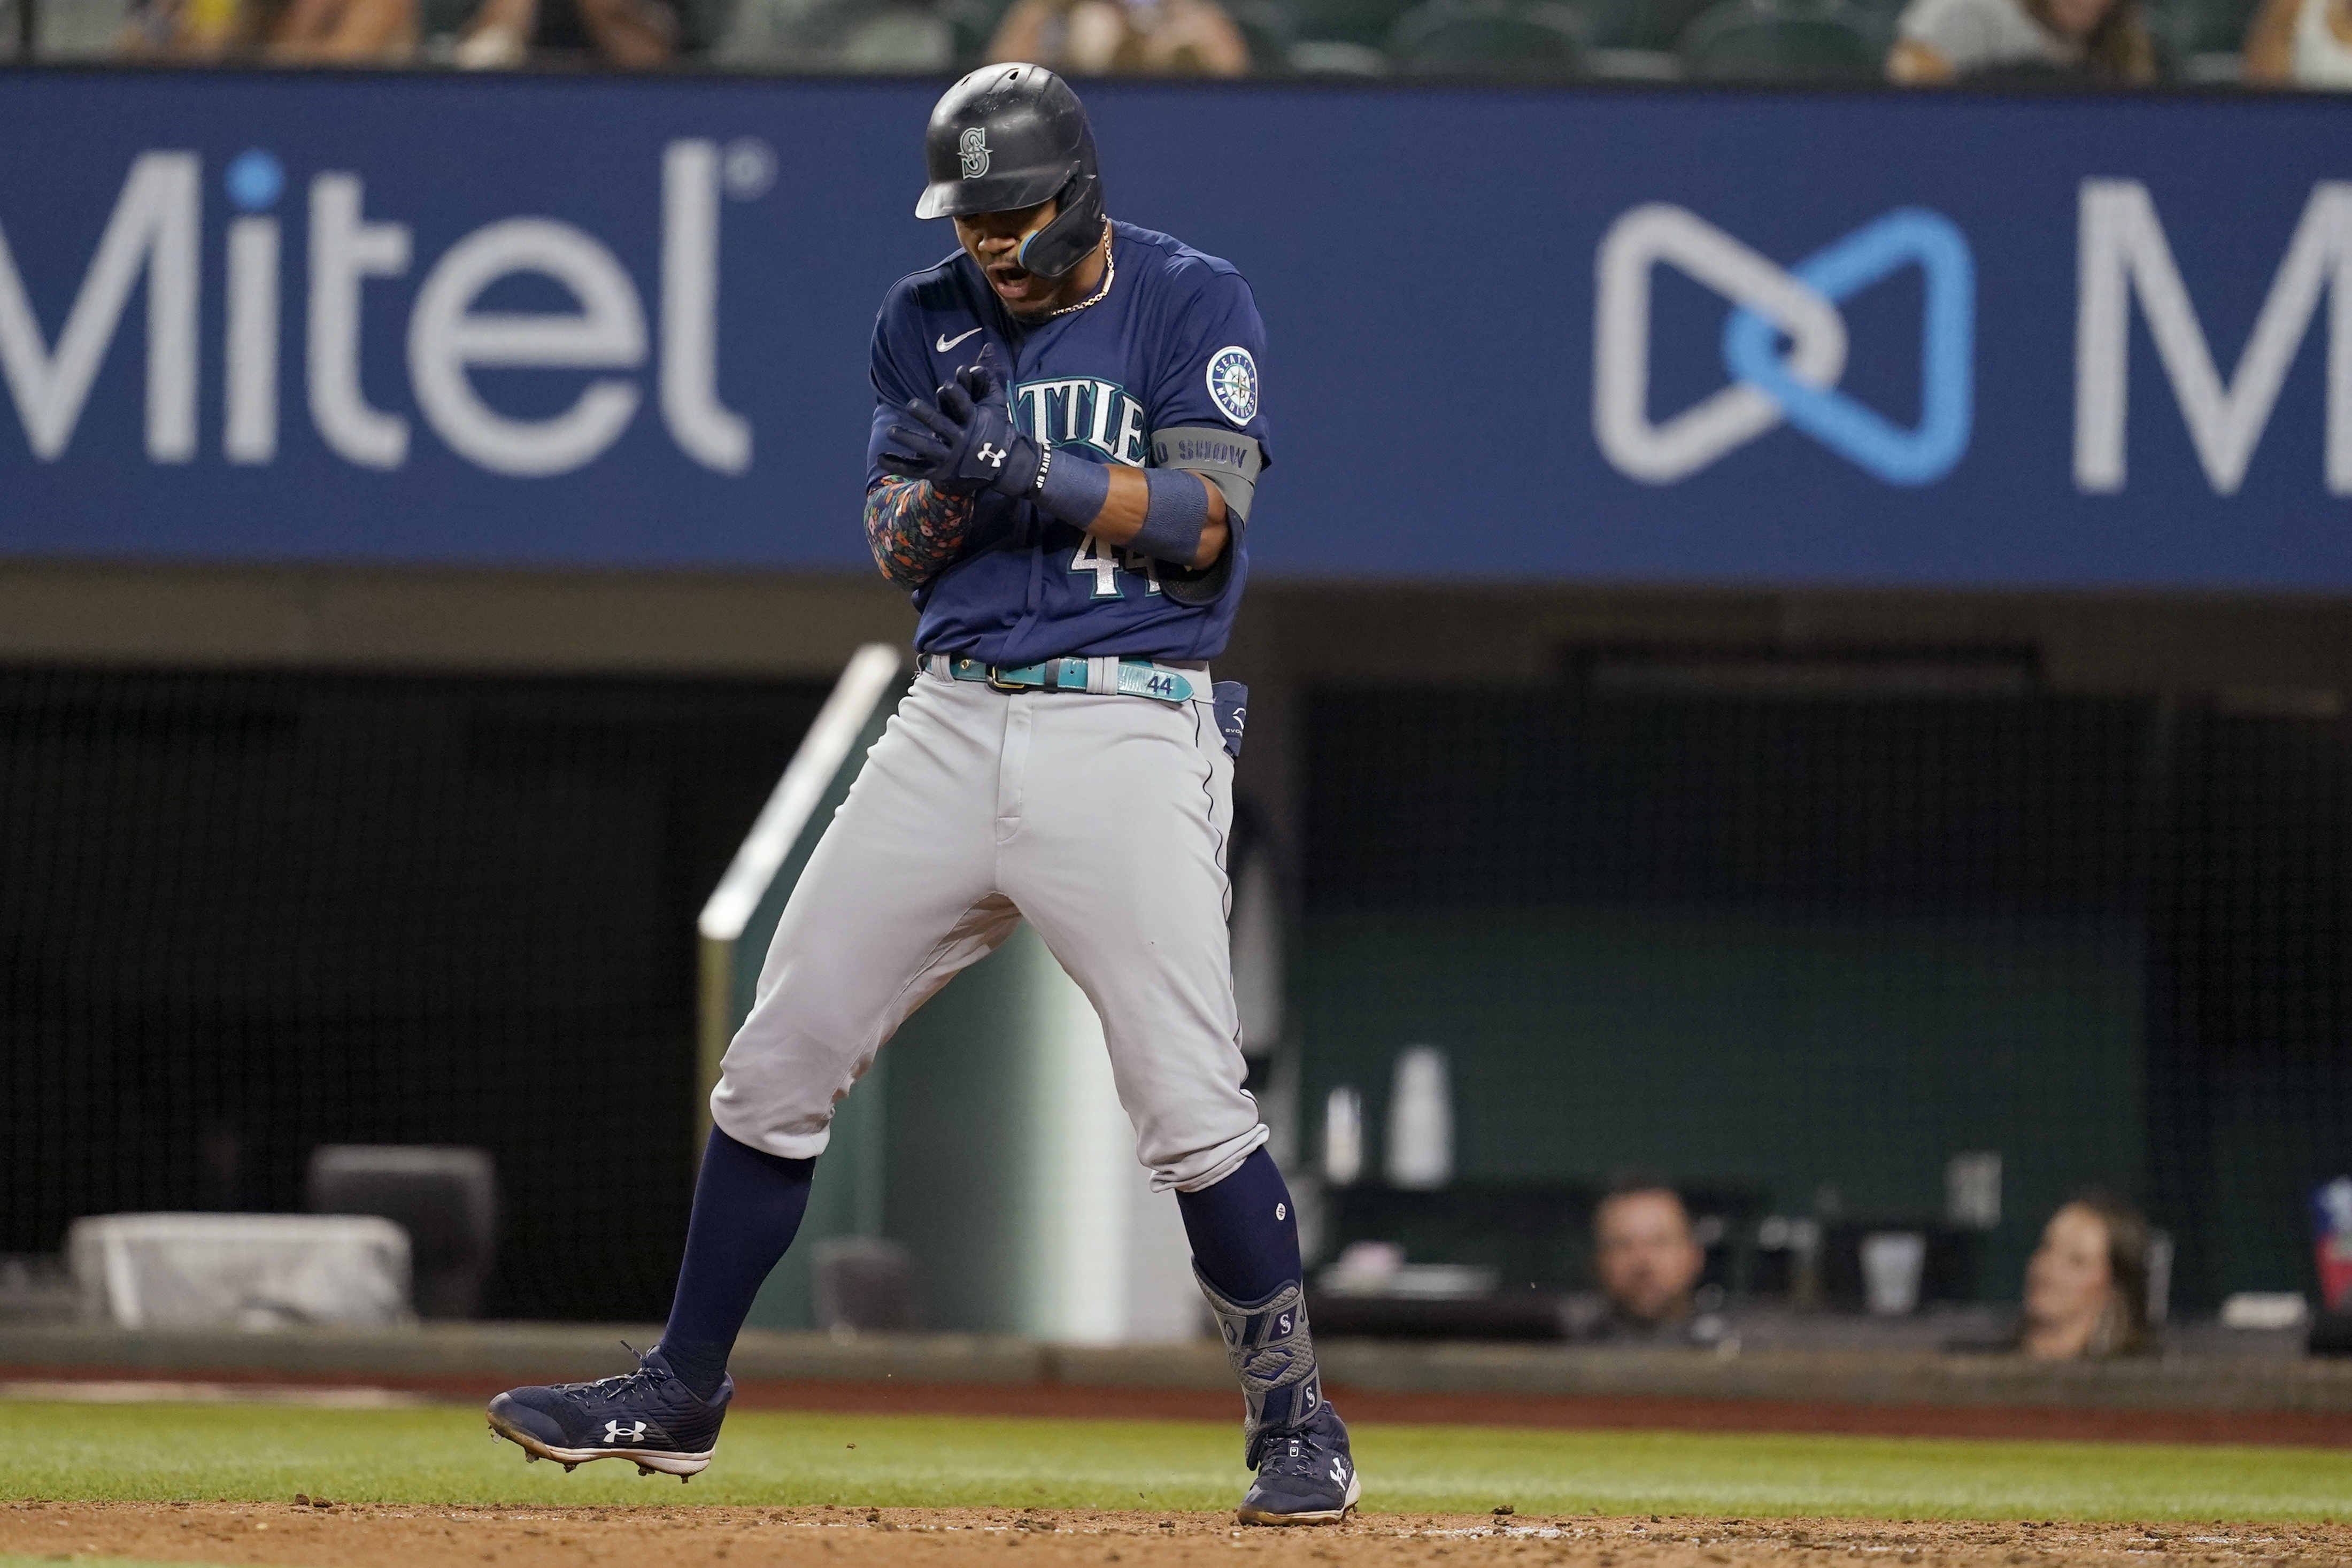 Mariners rally past Rangers 6-5 for 11th consecutive victory - The Columbian